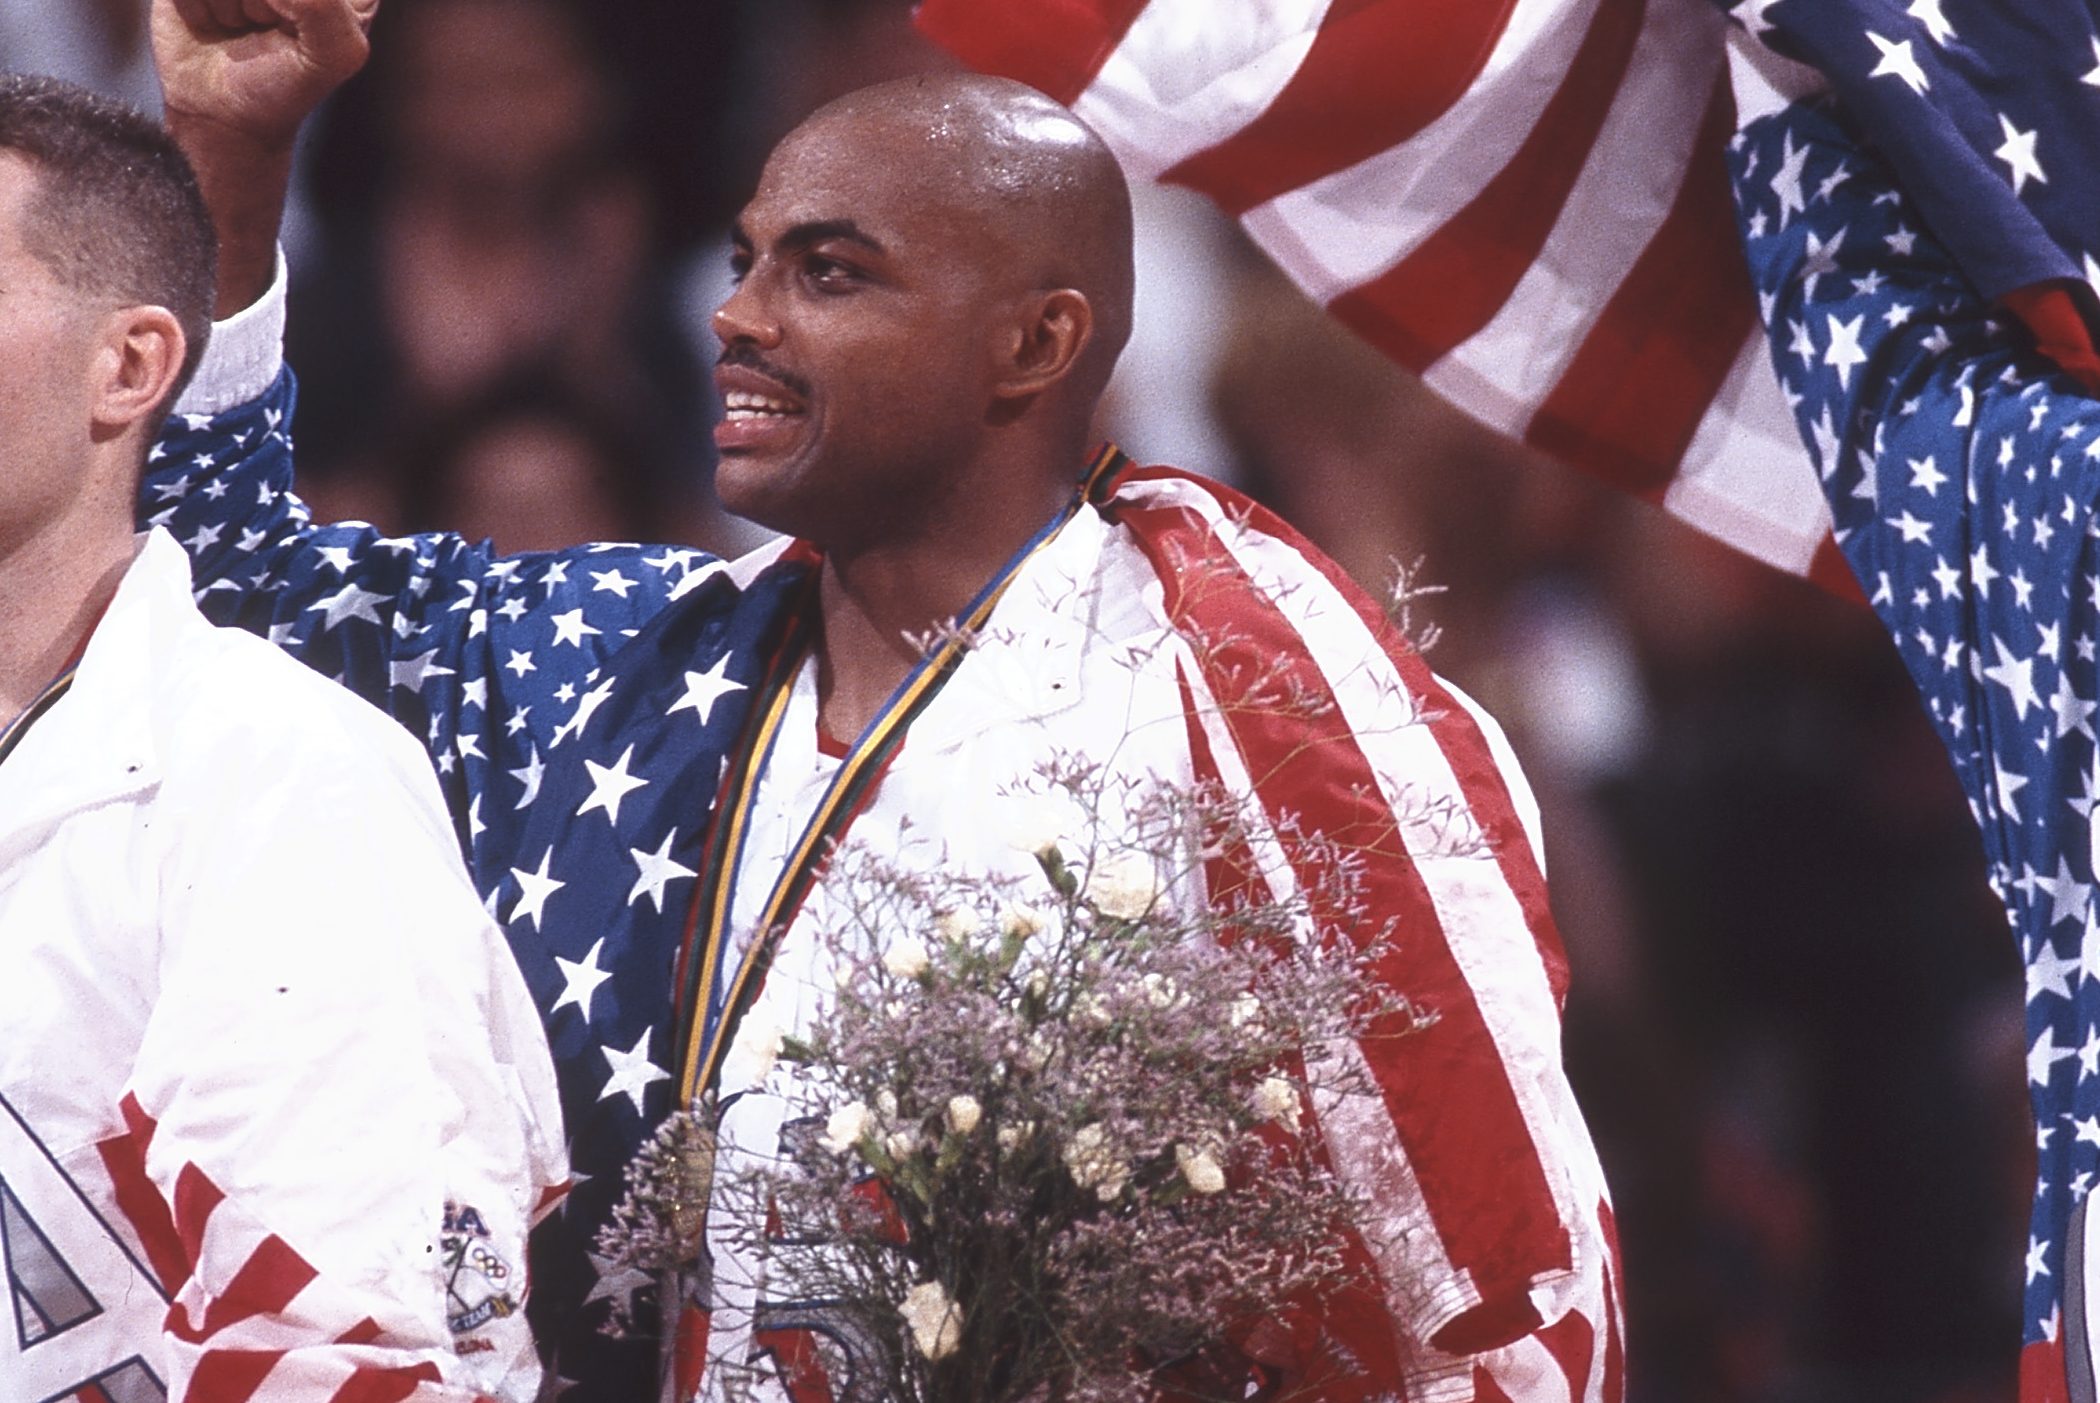 Charles Barkley of Team USA on the victor's podium after winning gold.